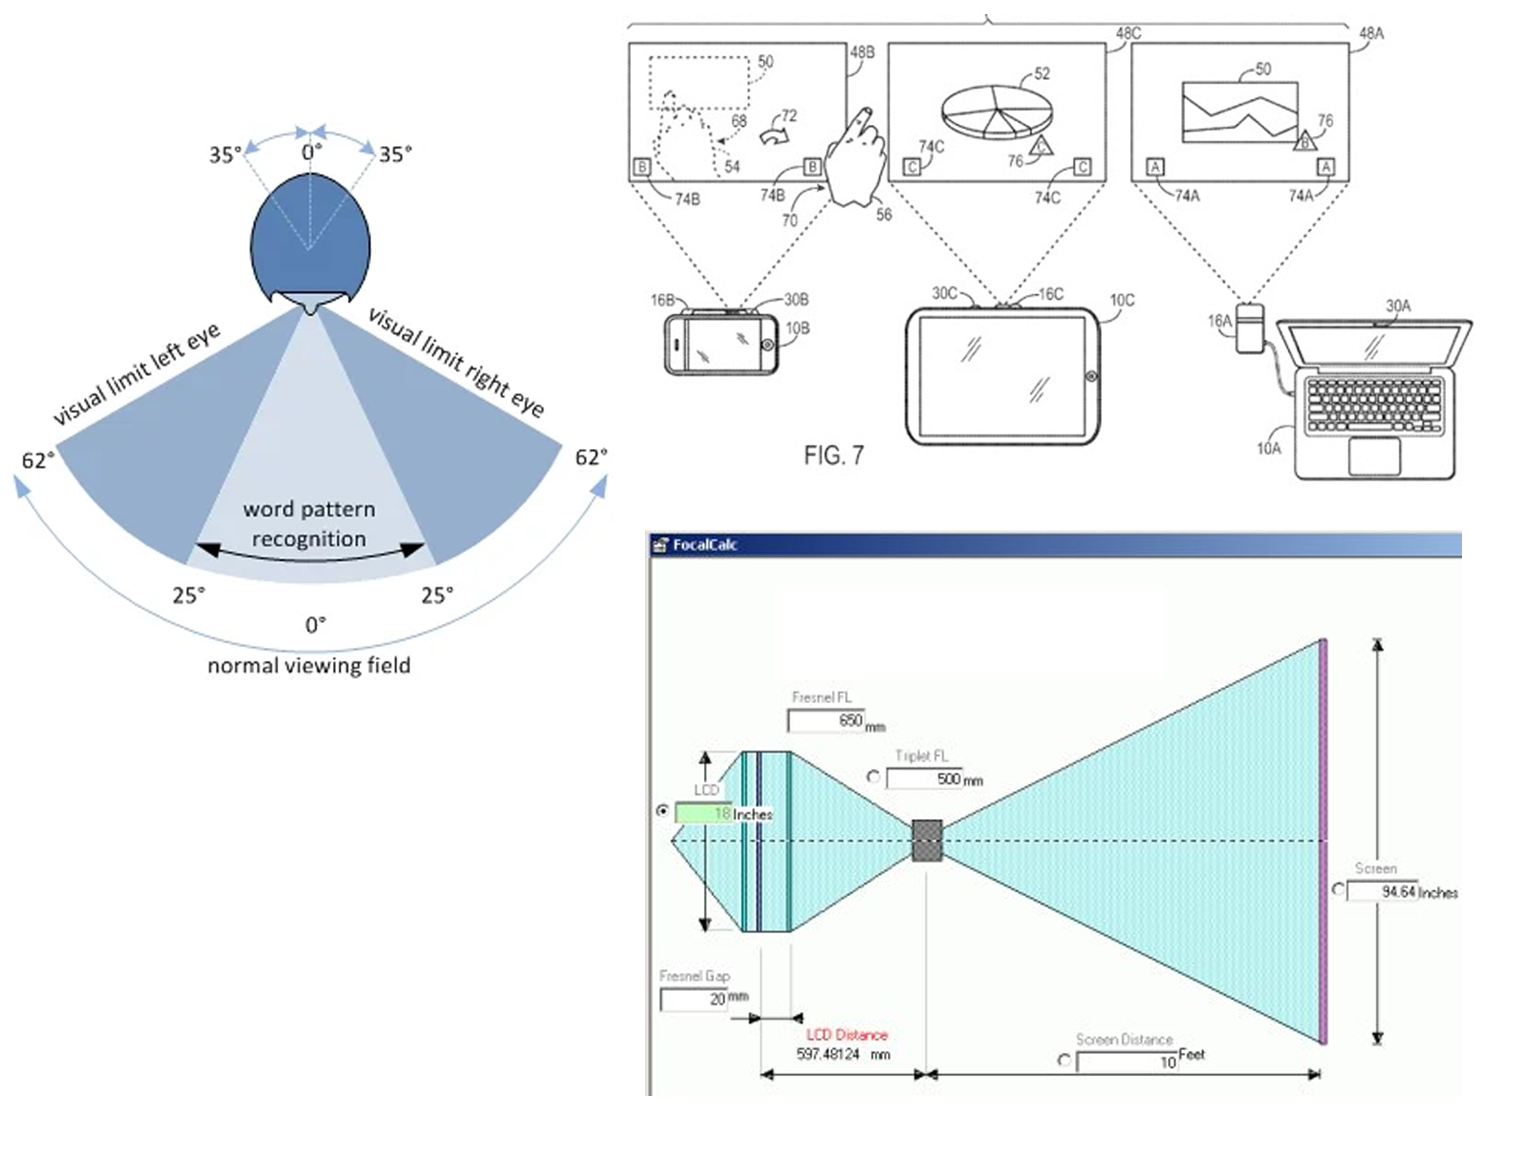 Blueprints for installing a projector and screen with details angles